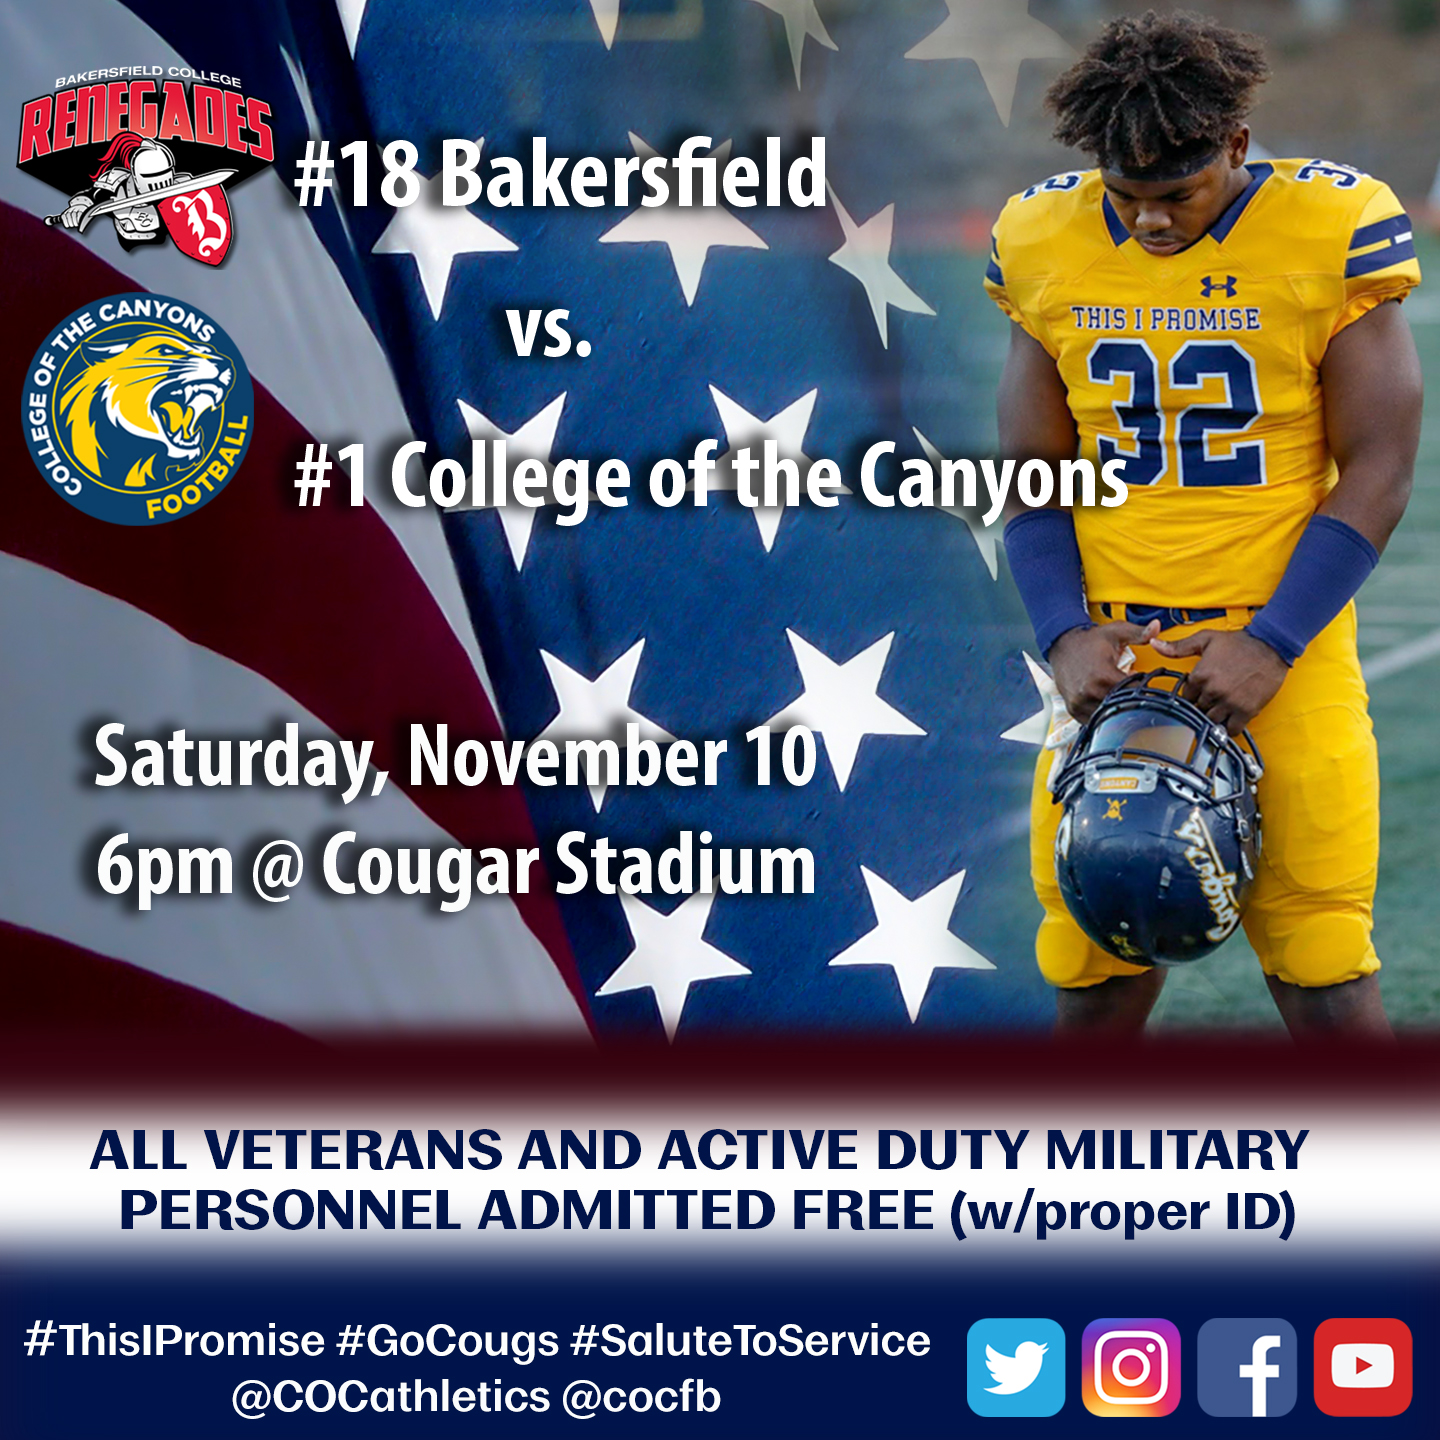 All veterans and active duty military personnel are invited to attend Saturday's COC football game vs. Bakersfield College free of charge.